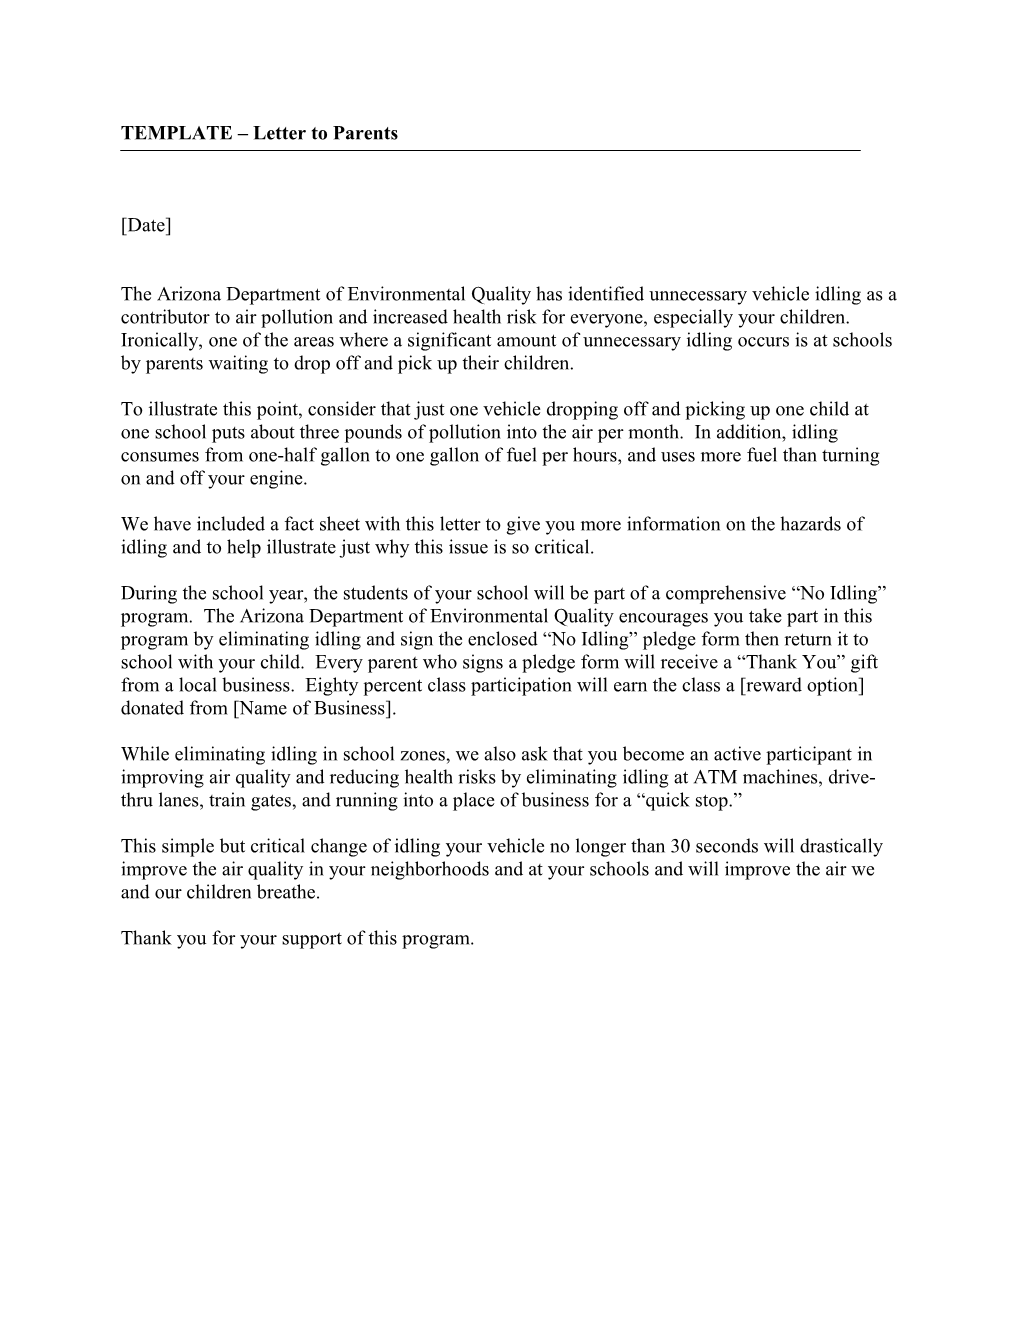 TEMPLATE Letter to Parents